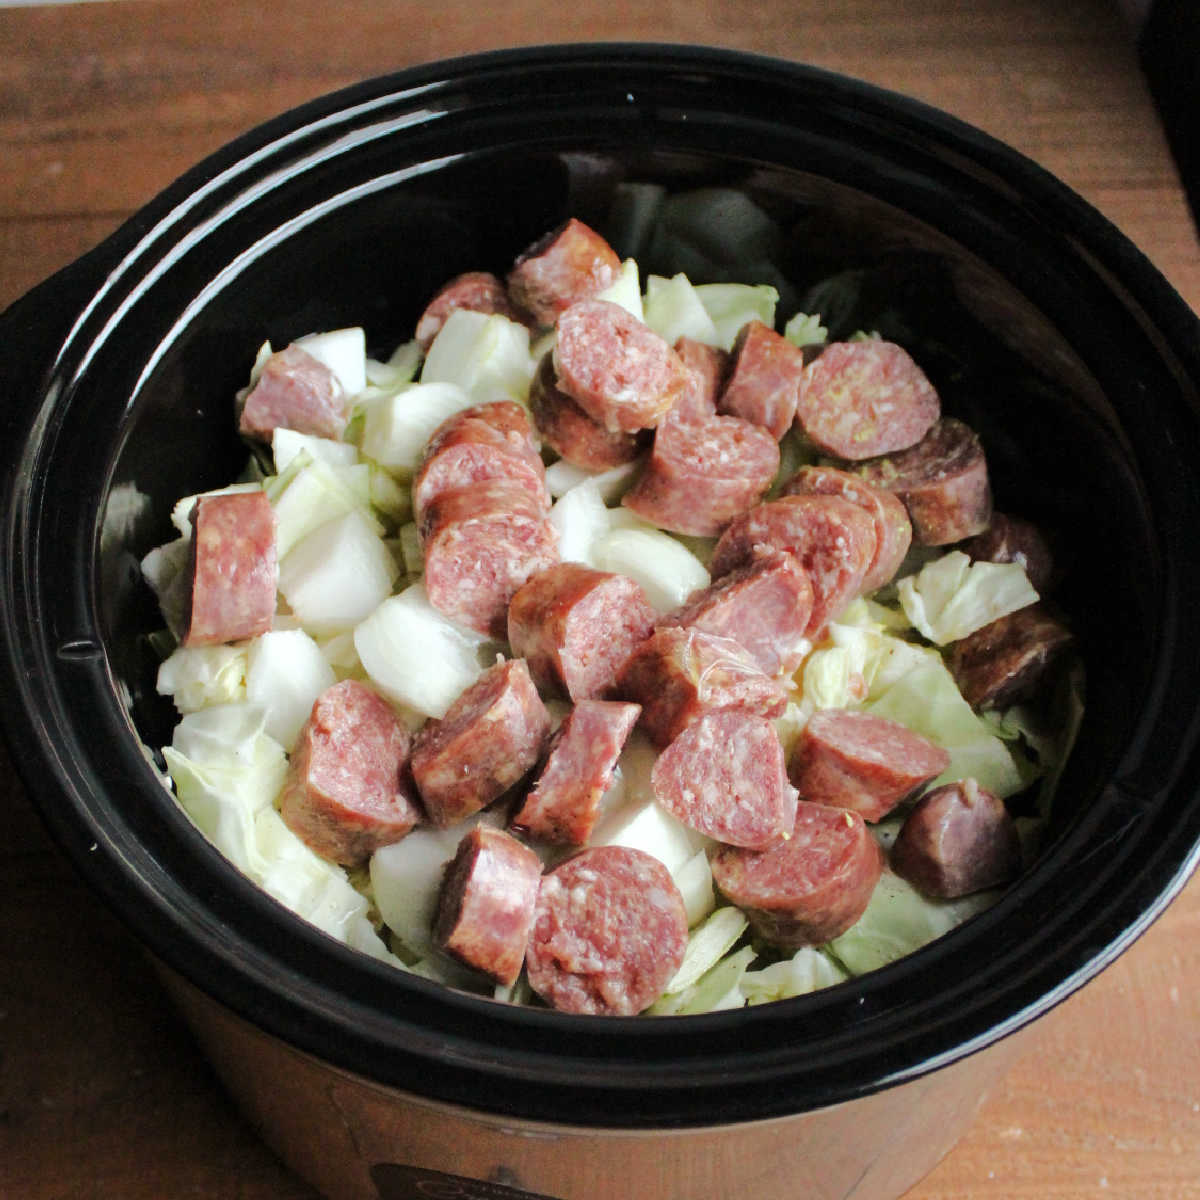 Slow cooker filled with cabbage, onion, kielbasa, seasonings and chicken broth, ready to cook.